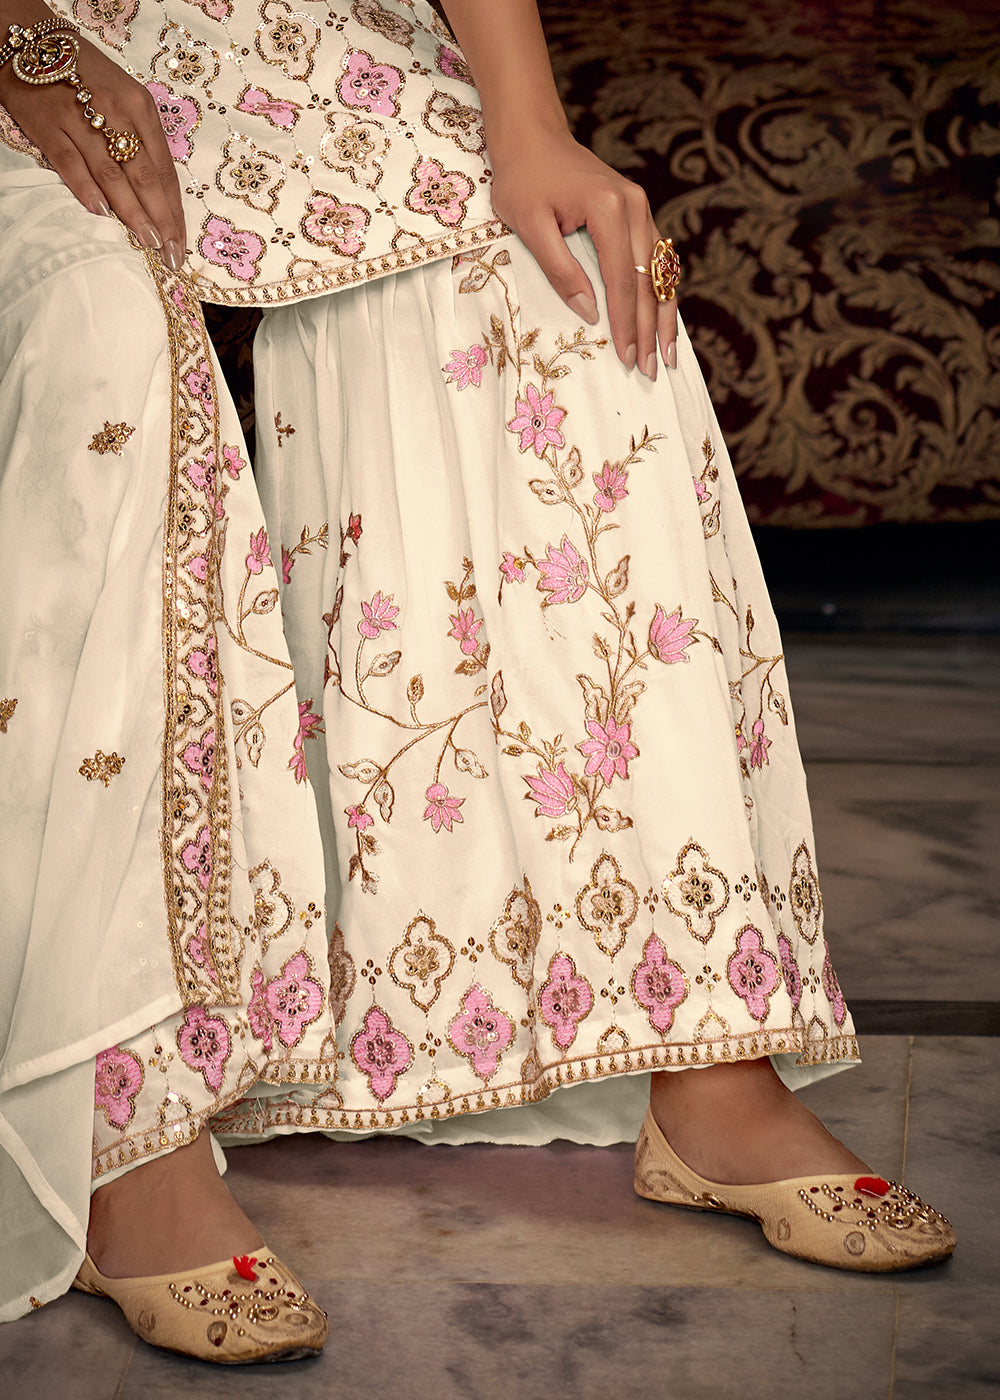 Shop Now Heavy Georgette Cream Sequins Embroidered Gharara Suit Online at Empress Clothing in USA, UK, Canada, Italy & Worldwide.